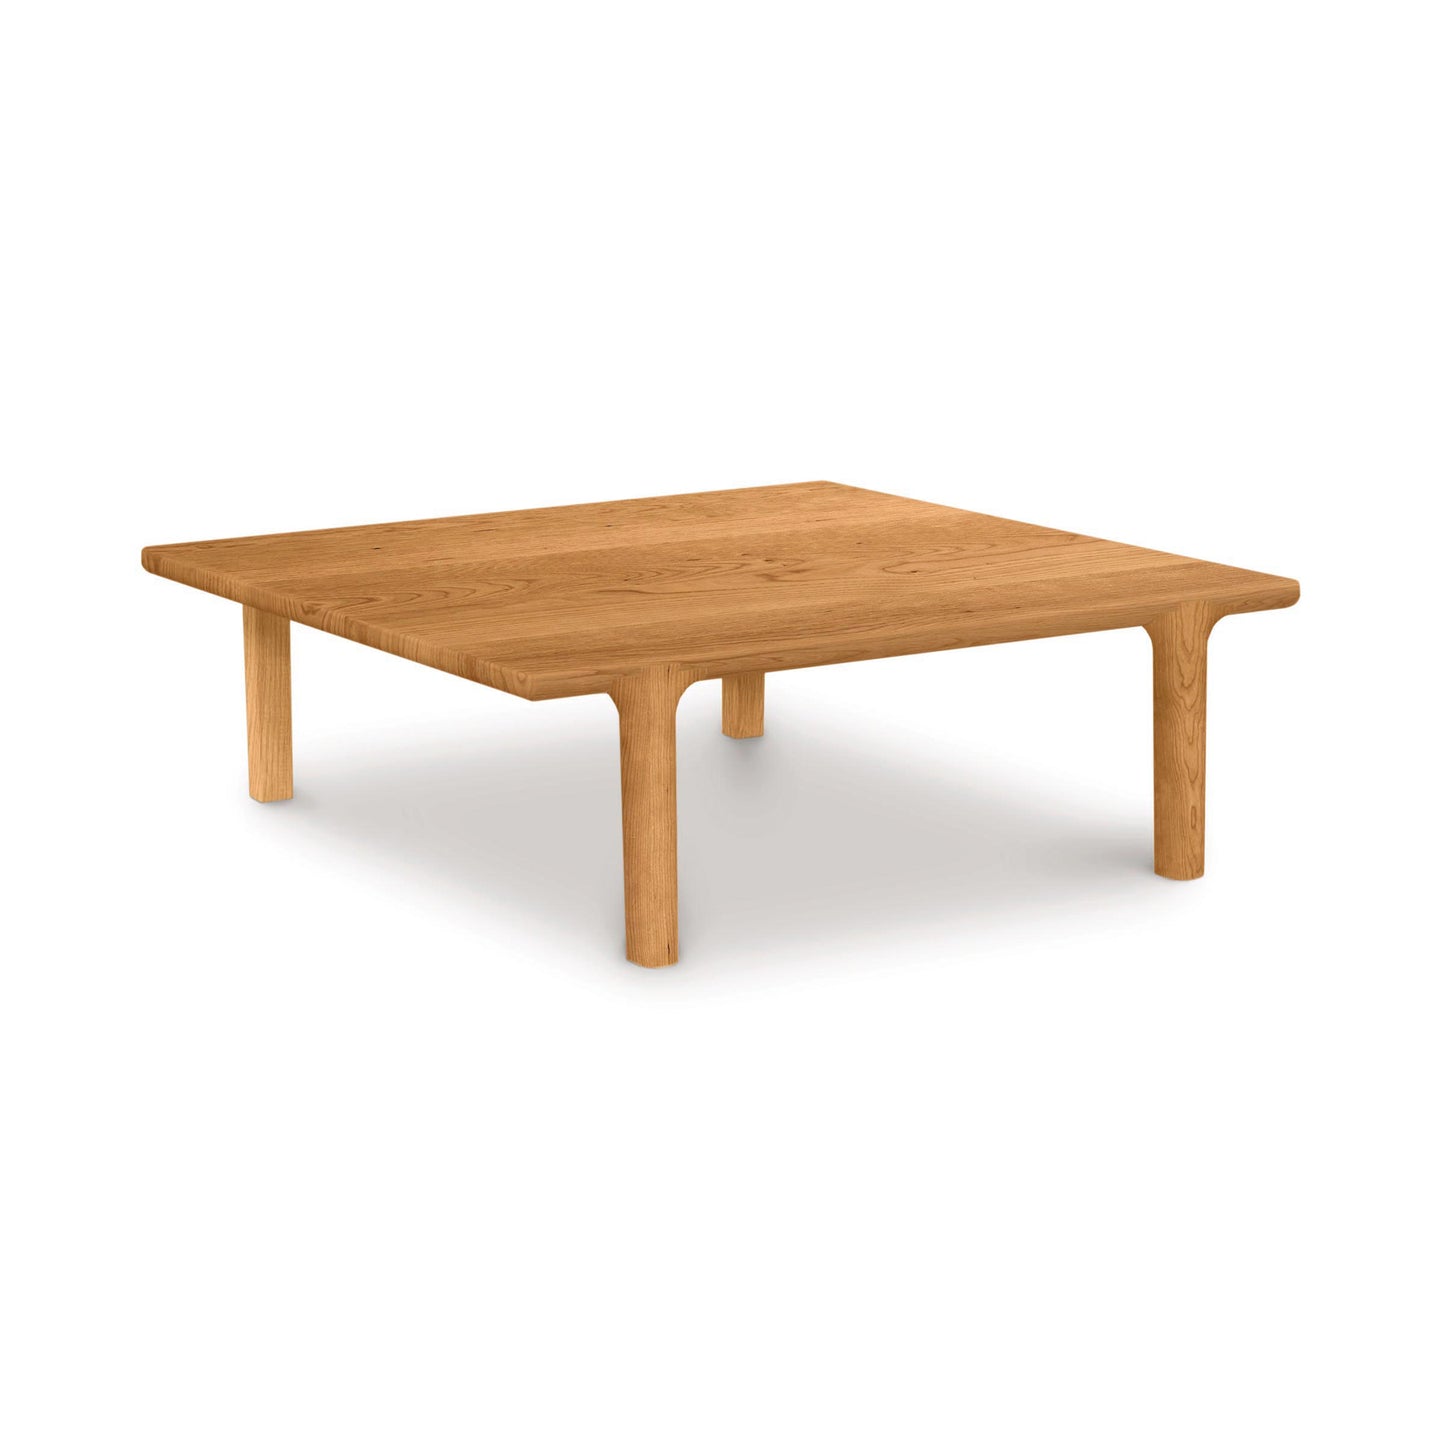 A simple Copeland Furniture Sierra Square Coffee Table with a square top and four legs, crafted from North American hardwood, against a white background.